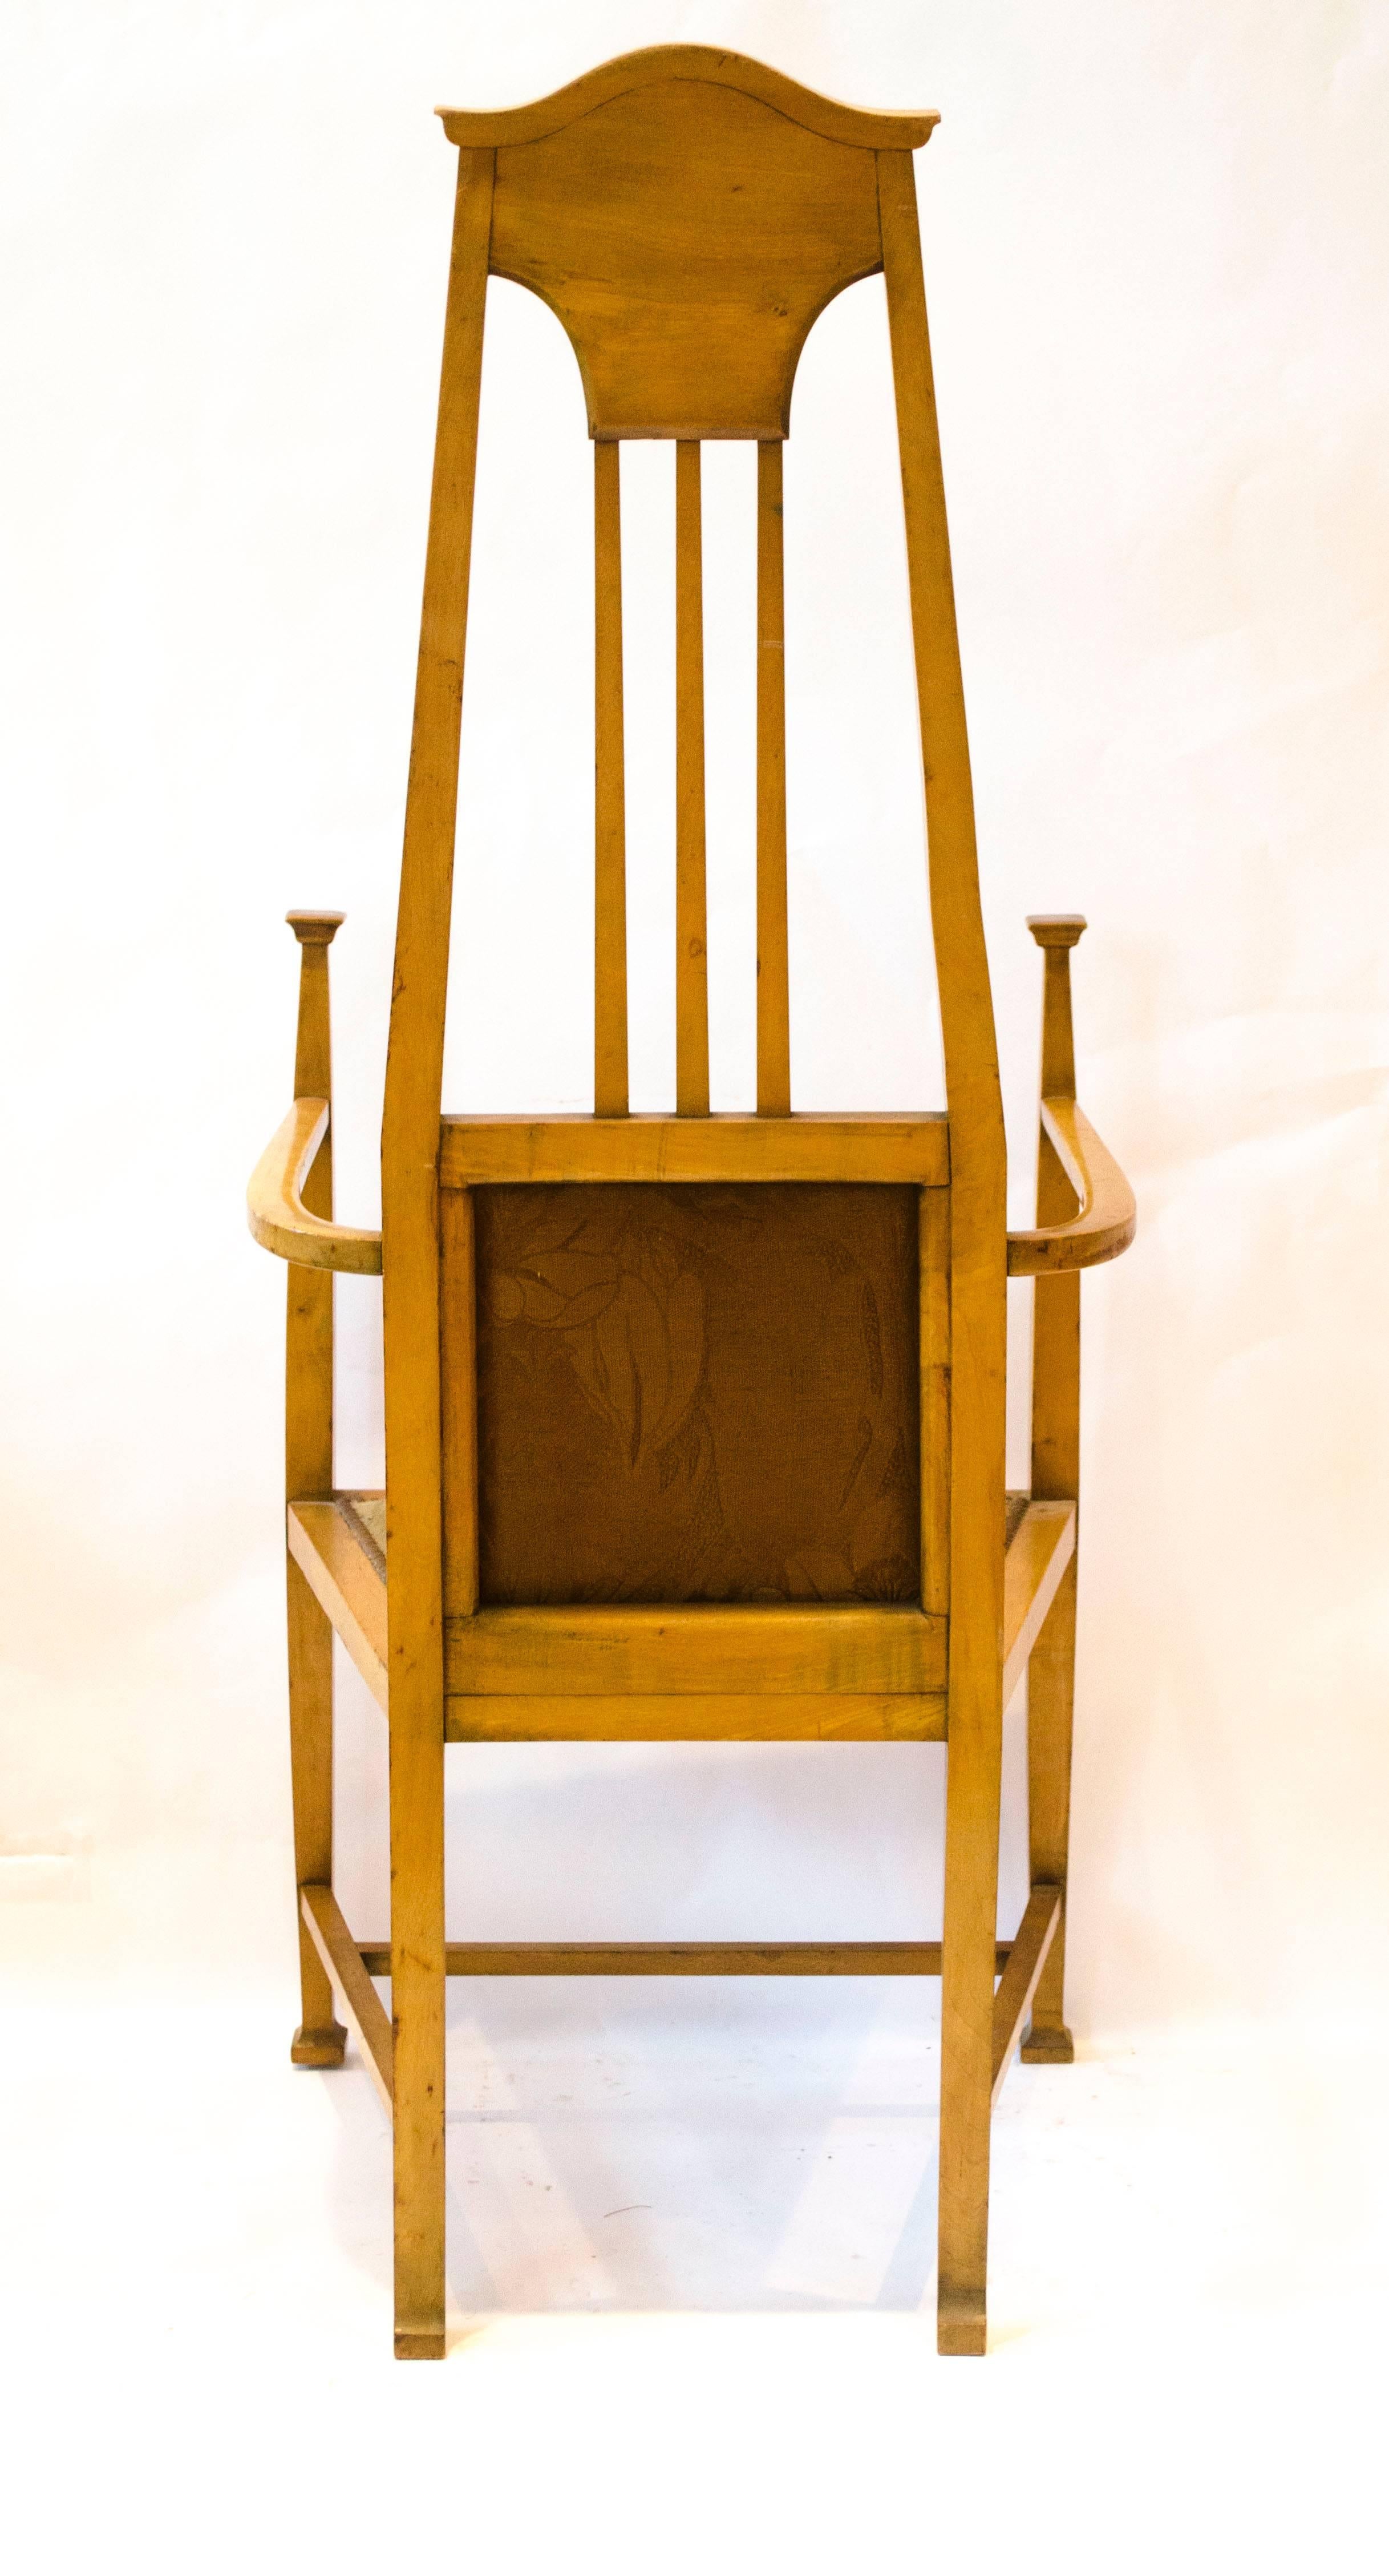 Hand-Crafted G M Ellwood for J S Henry. A Rare Satin Birch Arts and Crafts inlaid Armchair.